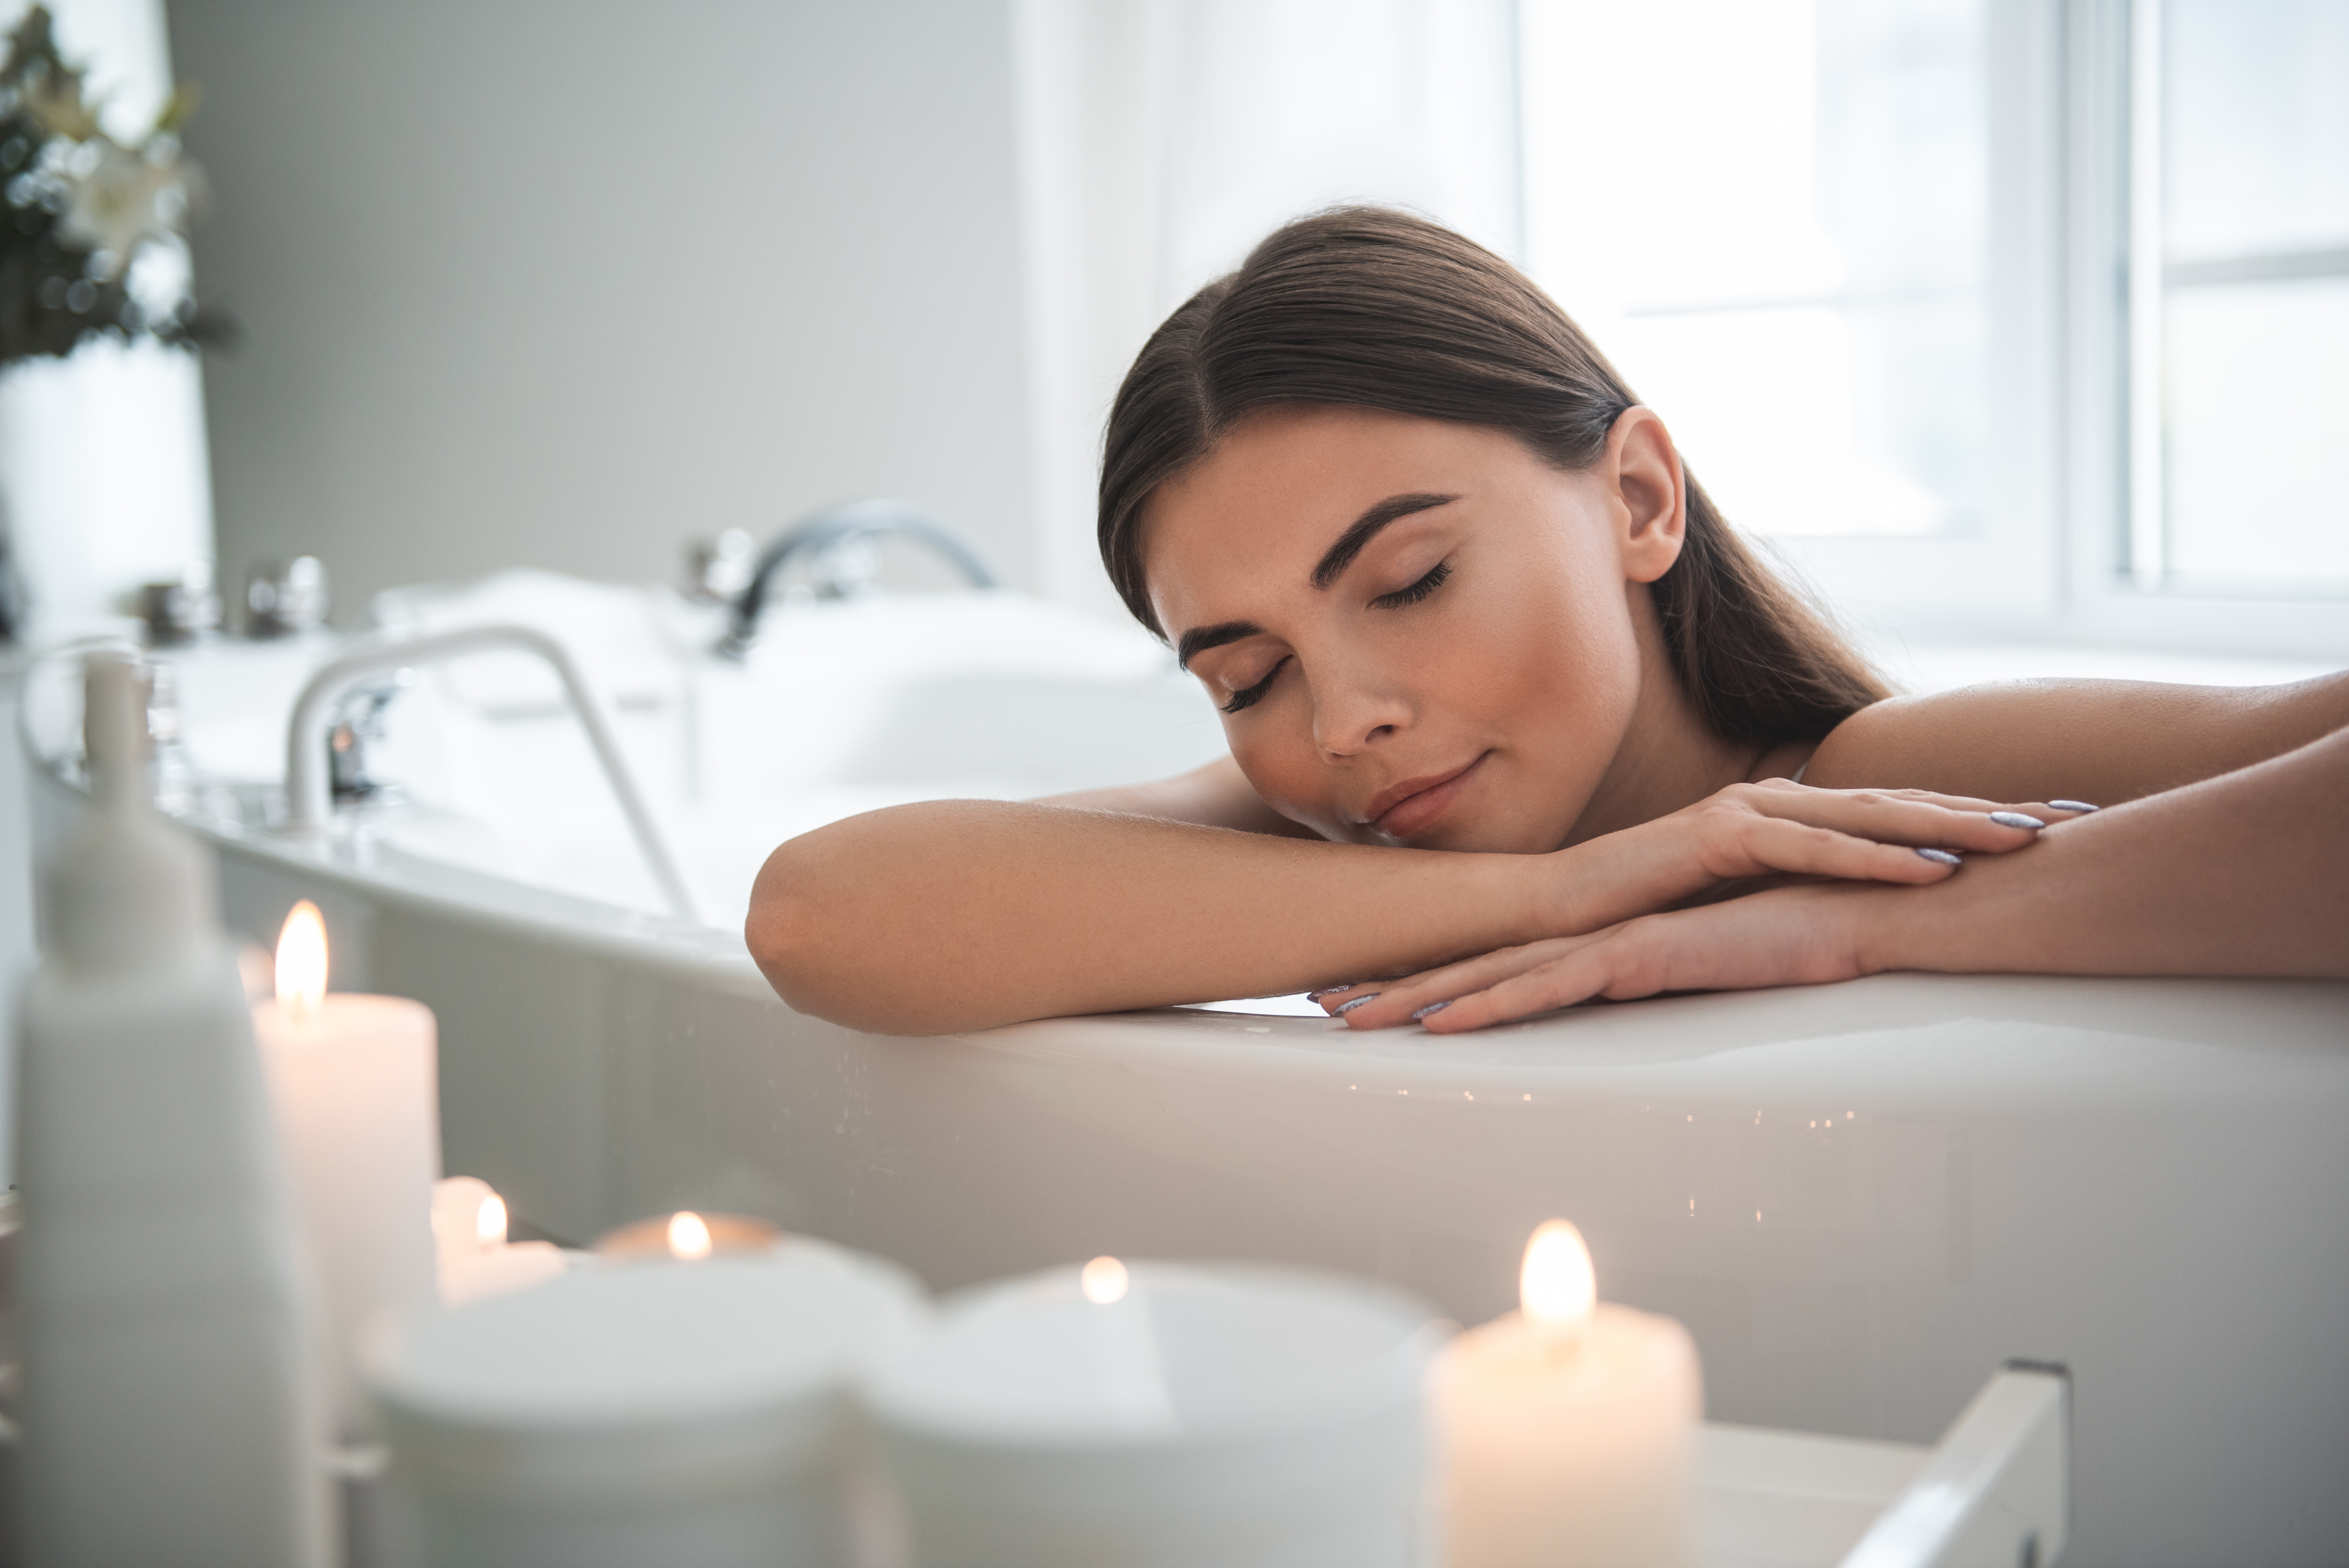 Woman Relaxing in Bathtub With Candles Burning Nearby